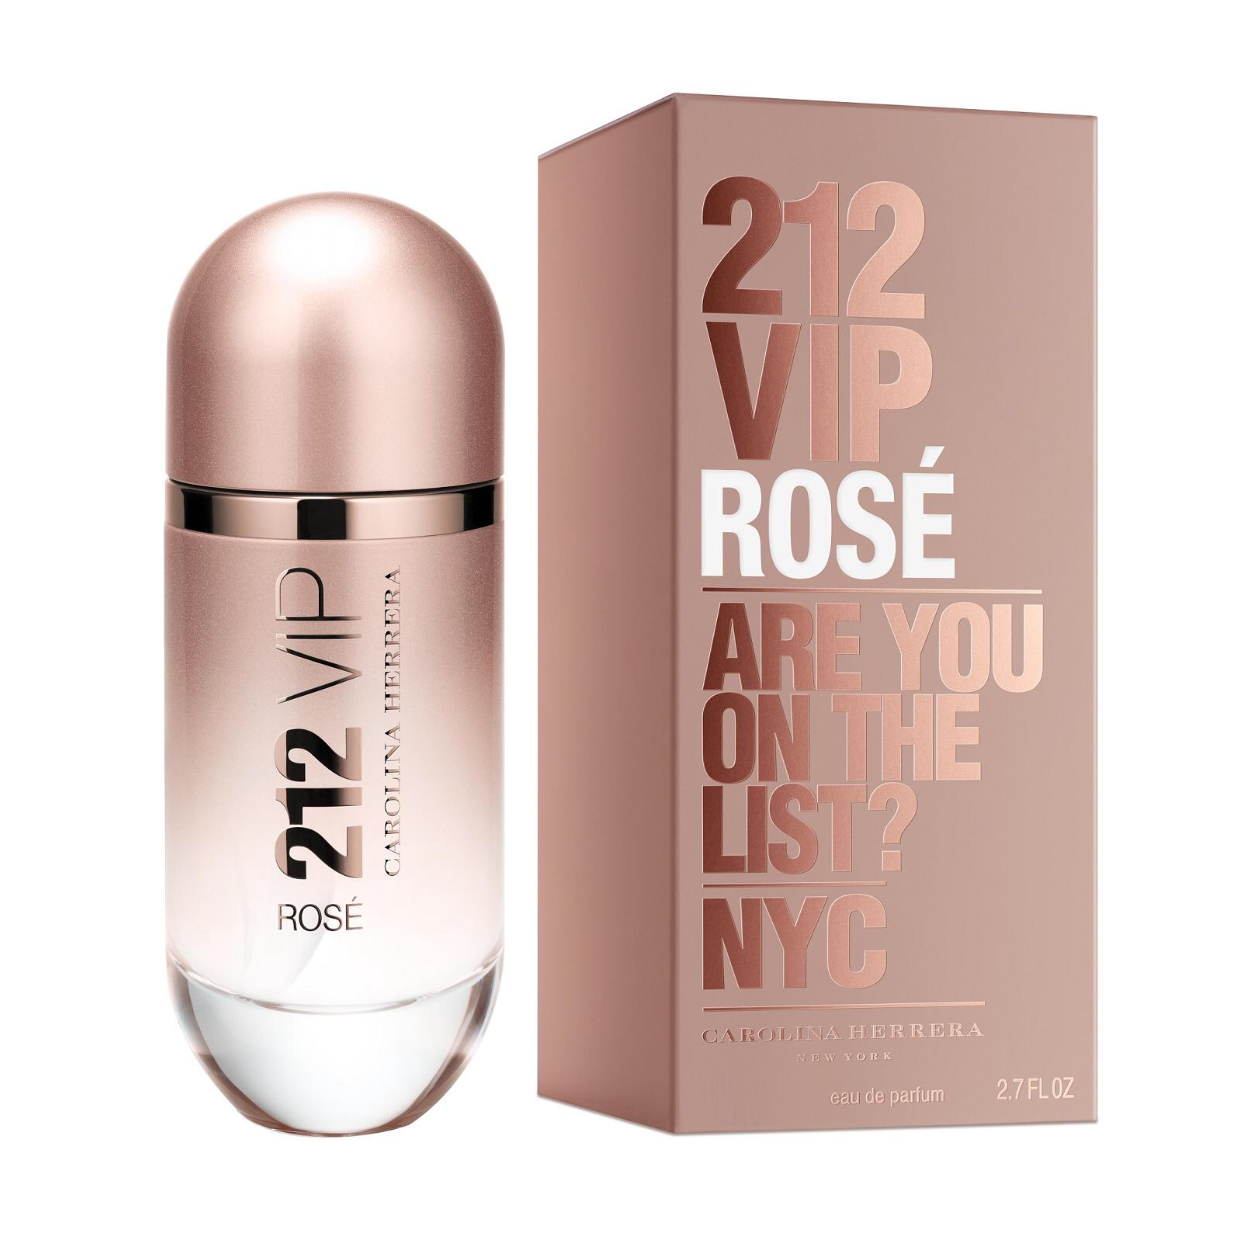 In 2014, Carolina Herrera lives up to her higher standards yet again. 212 VIP Rose is the newest of the 212 collection. Following the release of 2010's VIP, Rose represents chic and glamour, an elegant fun scent that is also fresh and sensual. Top notes reveal sparkling touch of pink champagne, fresh and slightly fruity, the perfect symbol of a NY party. The heart is revealing peach tree blossom accord which n provides a dose of sophistication to the composition. The base performs with sensual and soft woody notes. Recommended Wear: Night <iframe width="560" height="315" src="//www.youtube.com/embed/2iTI0rnI-Hw" frameborder="0" allowfullscreen=""></iframe>